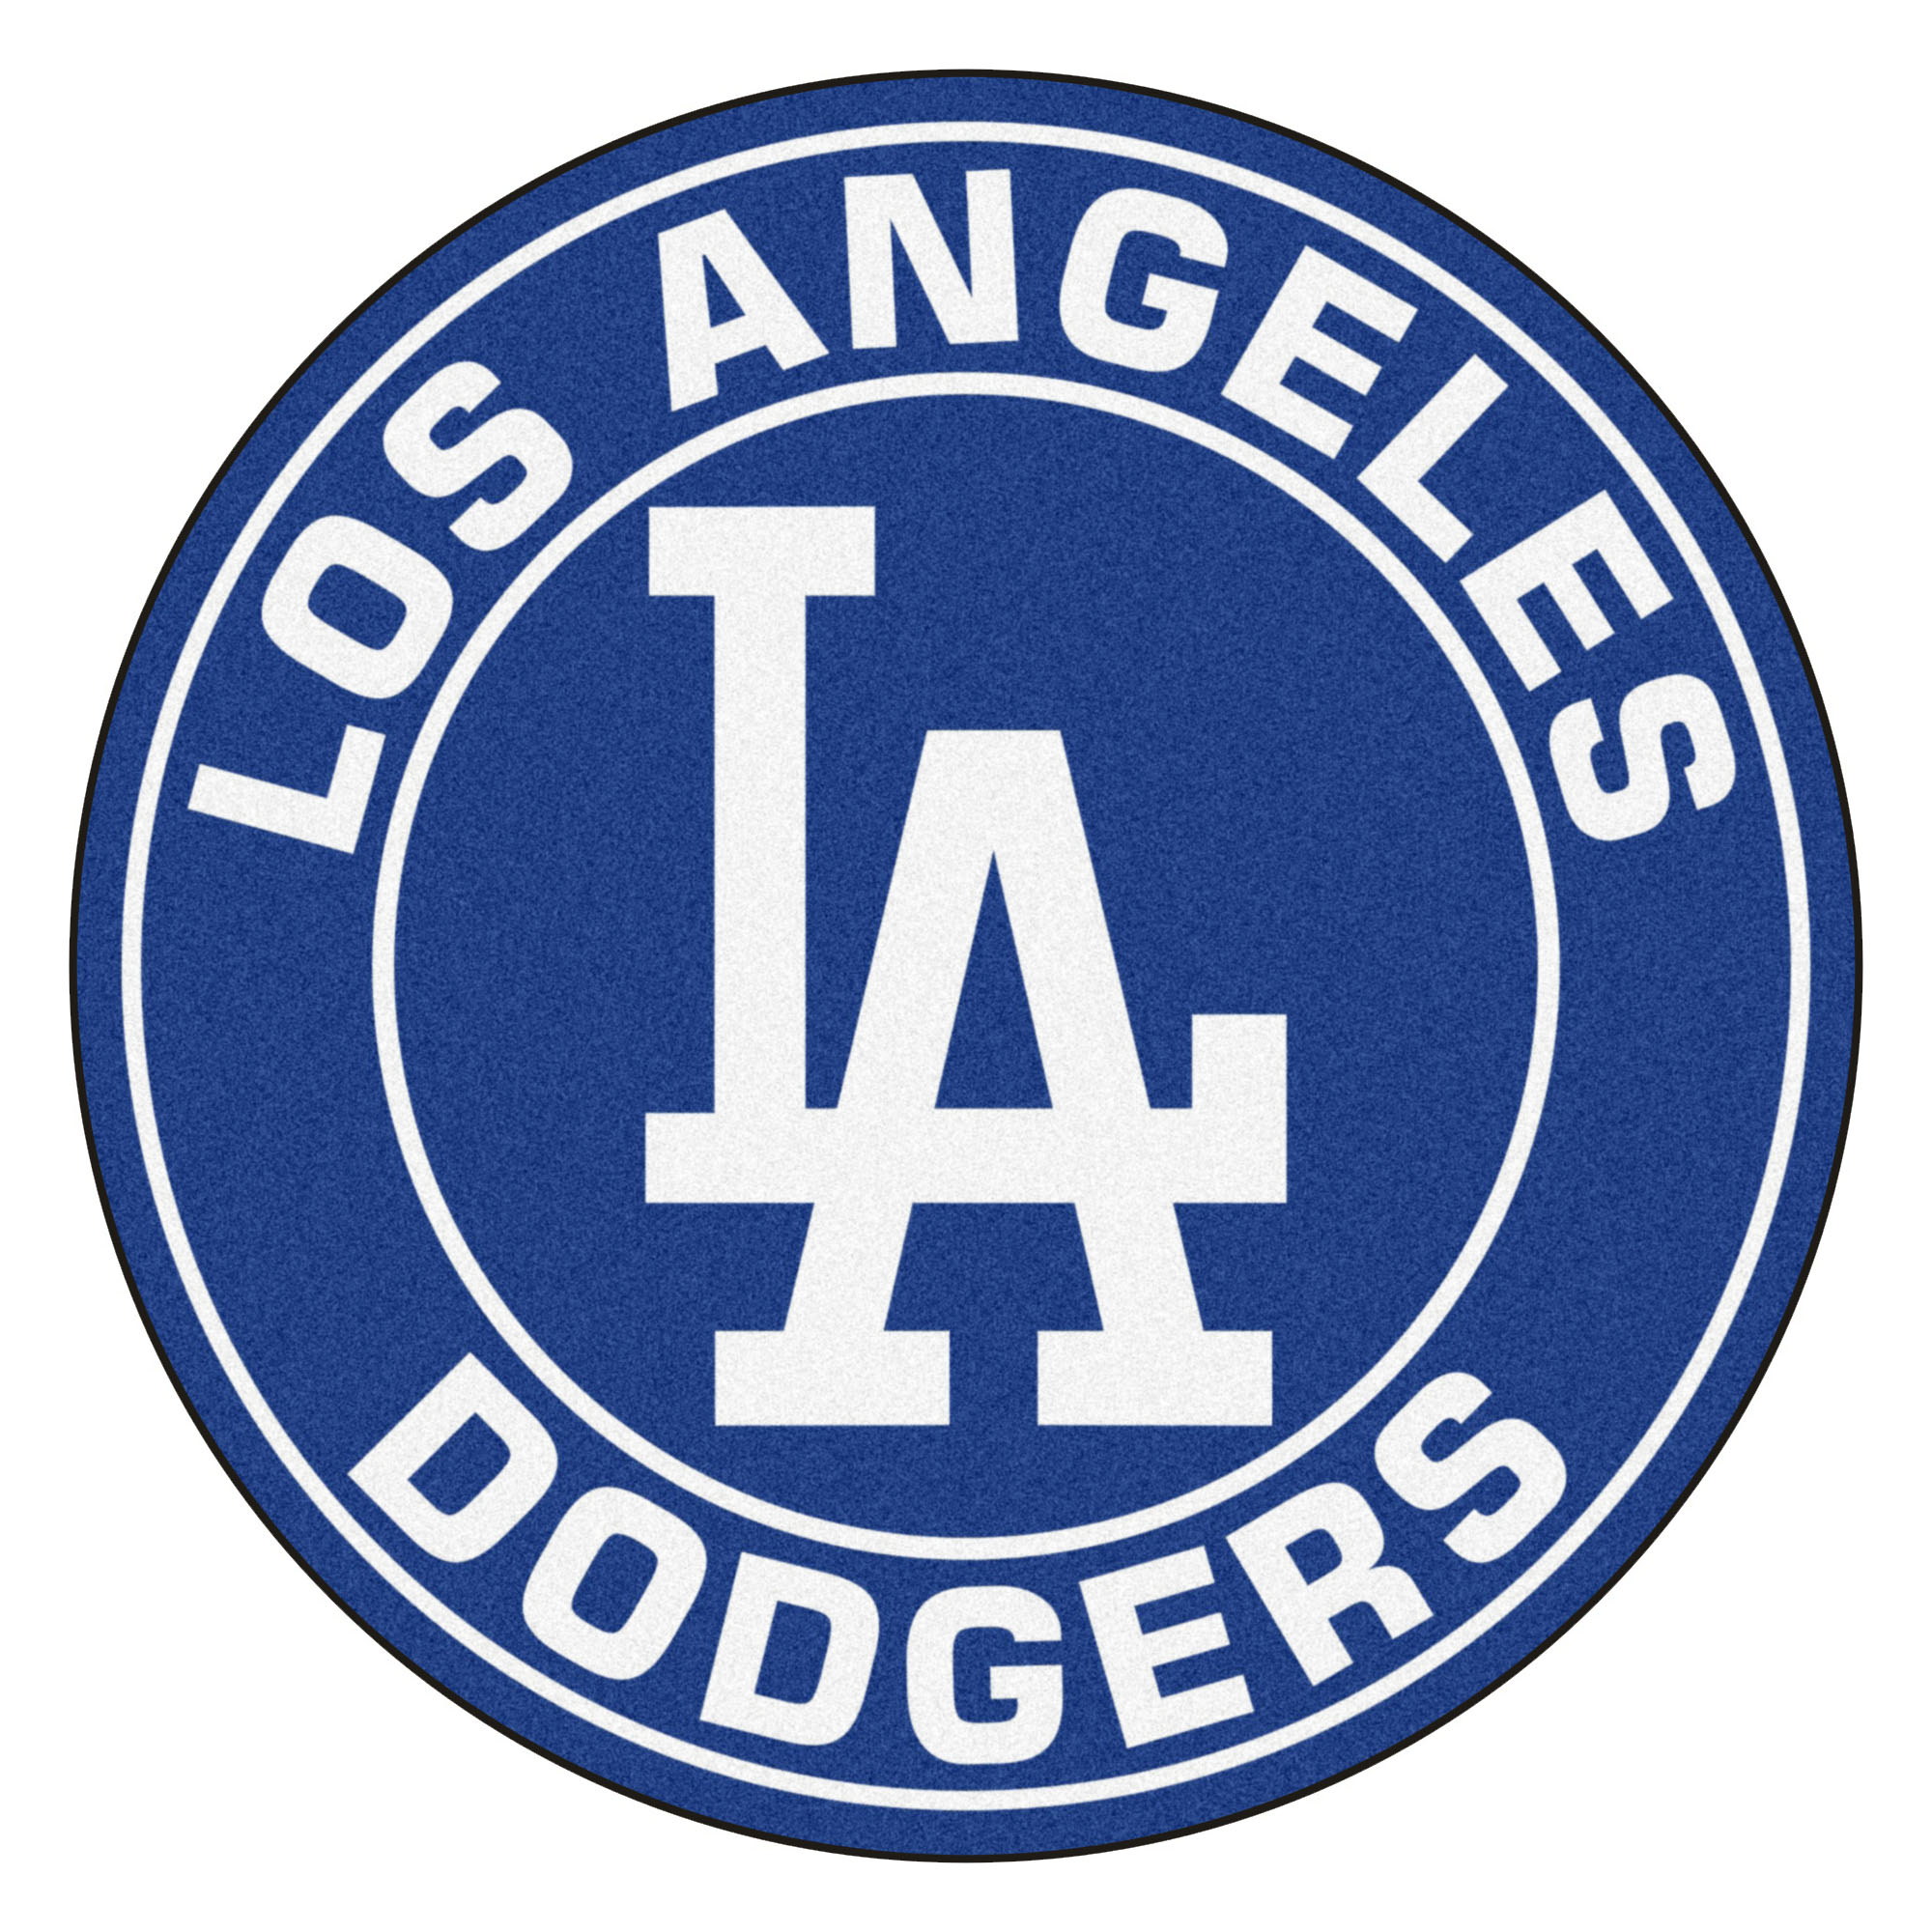 Presale Codes for Opening Day 2018 – Los Angeles Dodgers